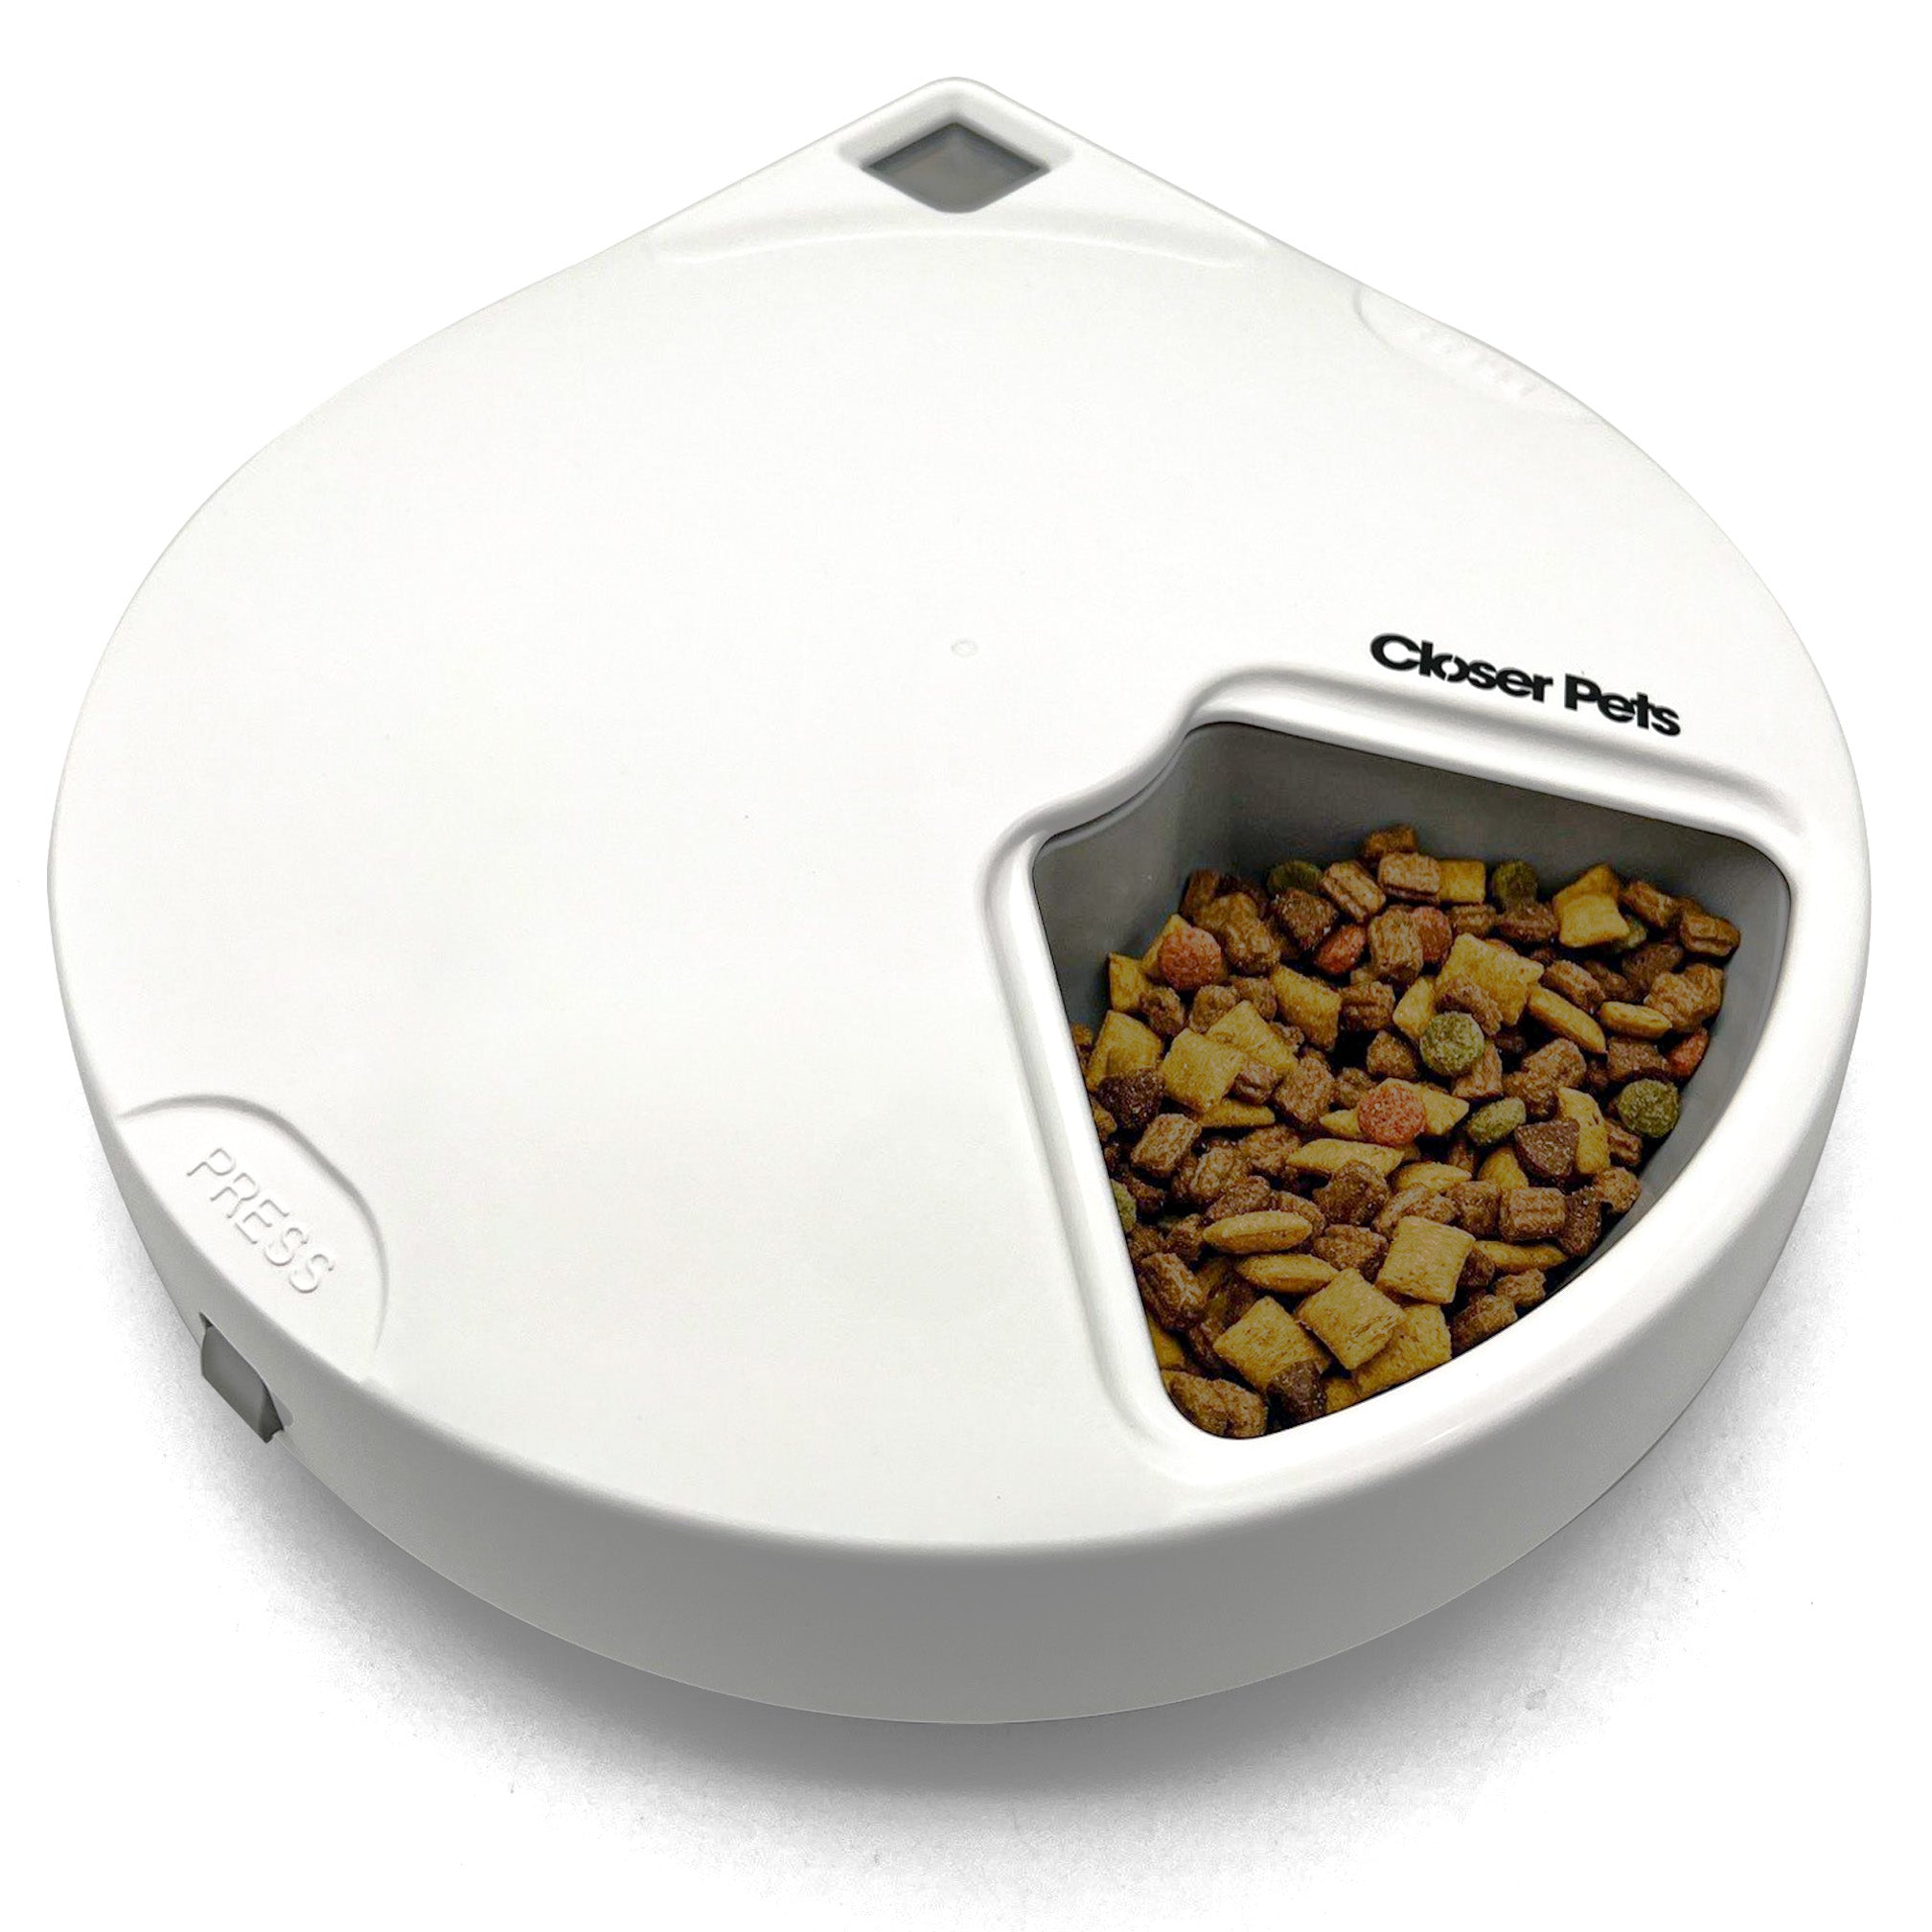 Closer Pets Five-meal Automatic Pet Feeder with Digital Timer (C500)